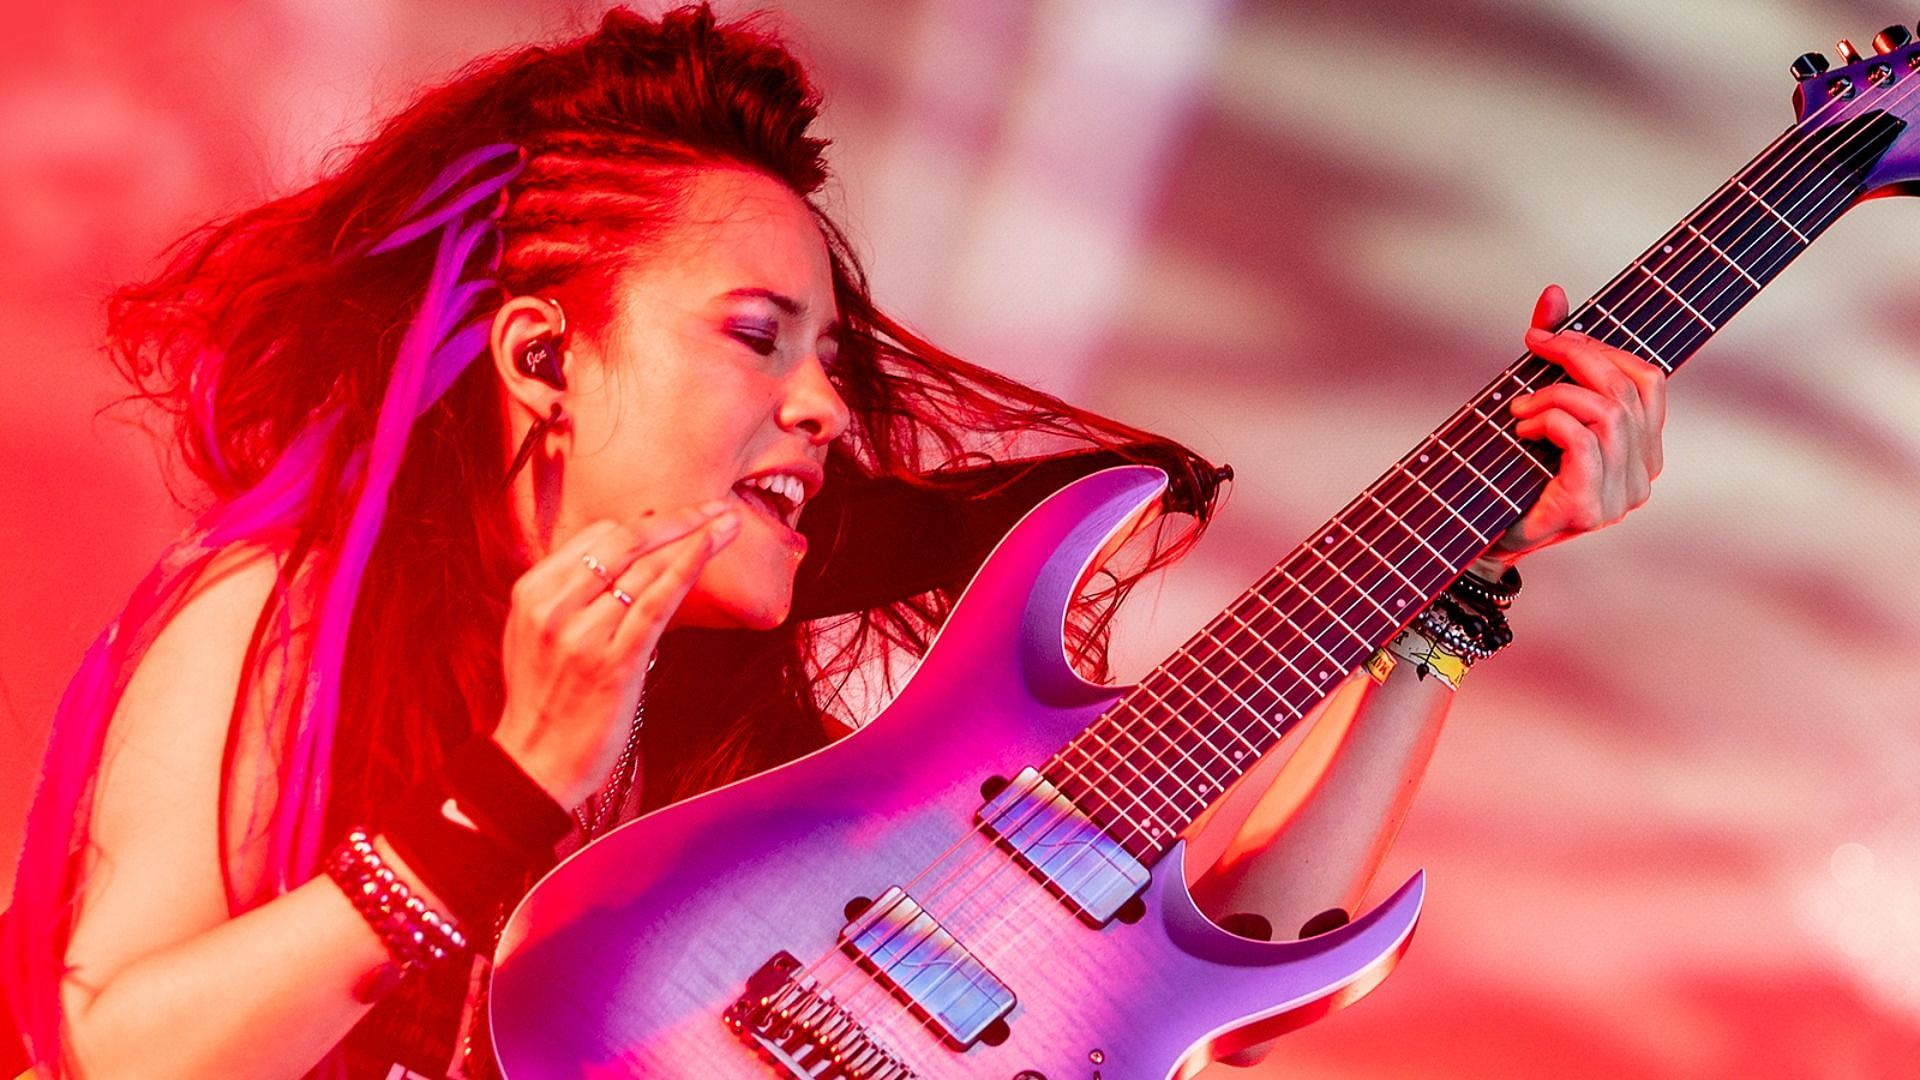 Jen Majura joined Evanescence in 2015 as their lead guitarist. (Image via Getty Images/Jeff Hahne)